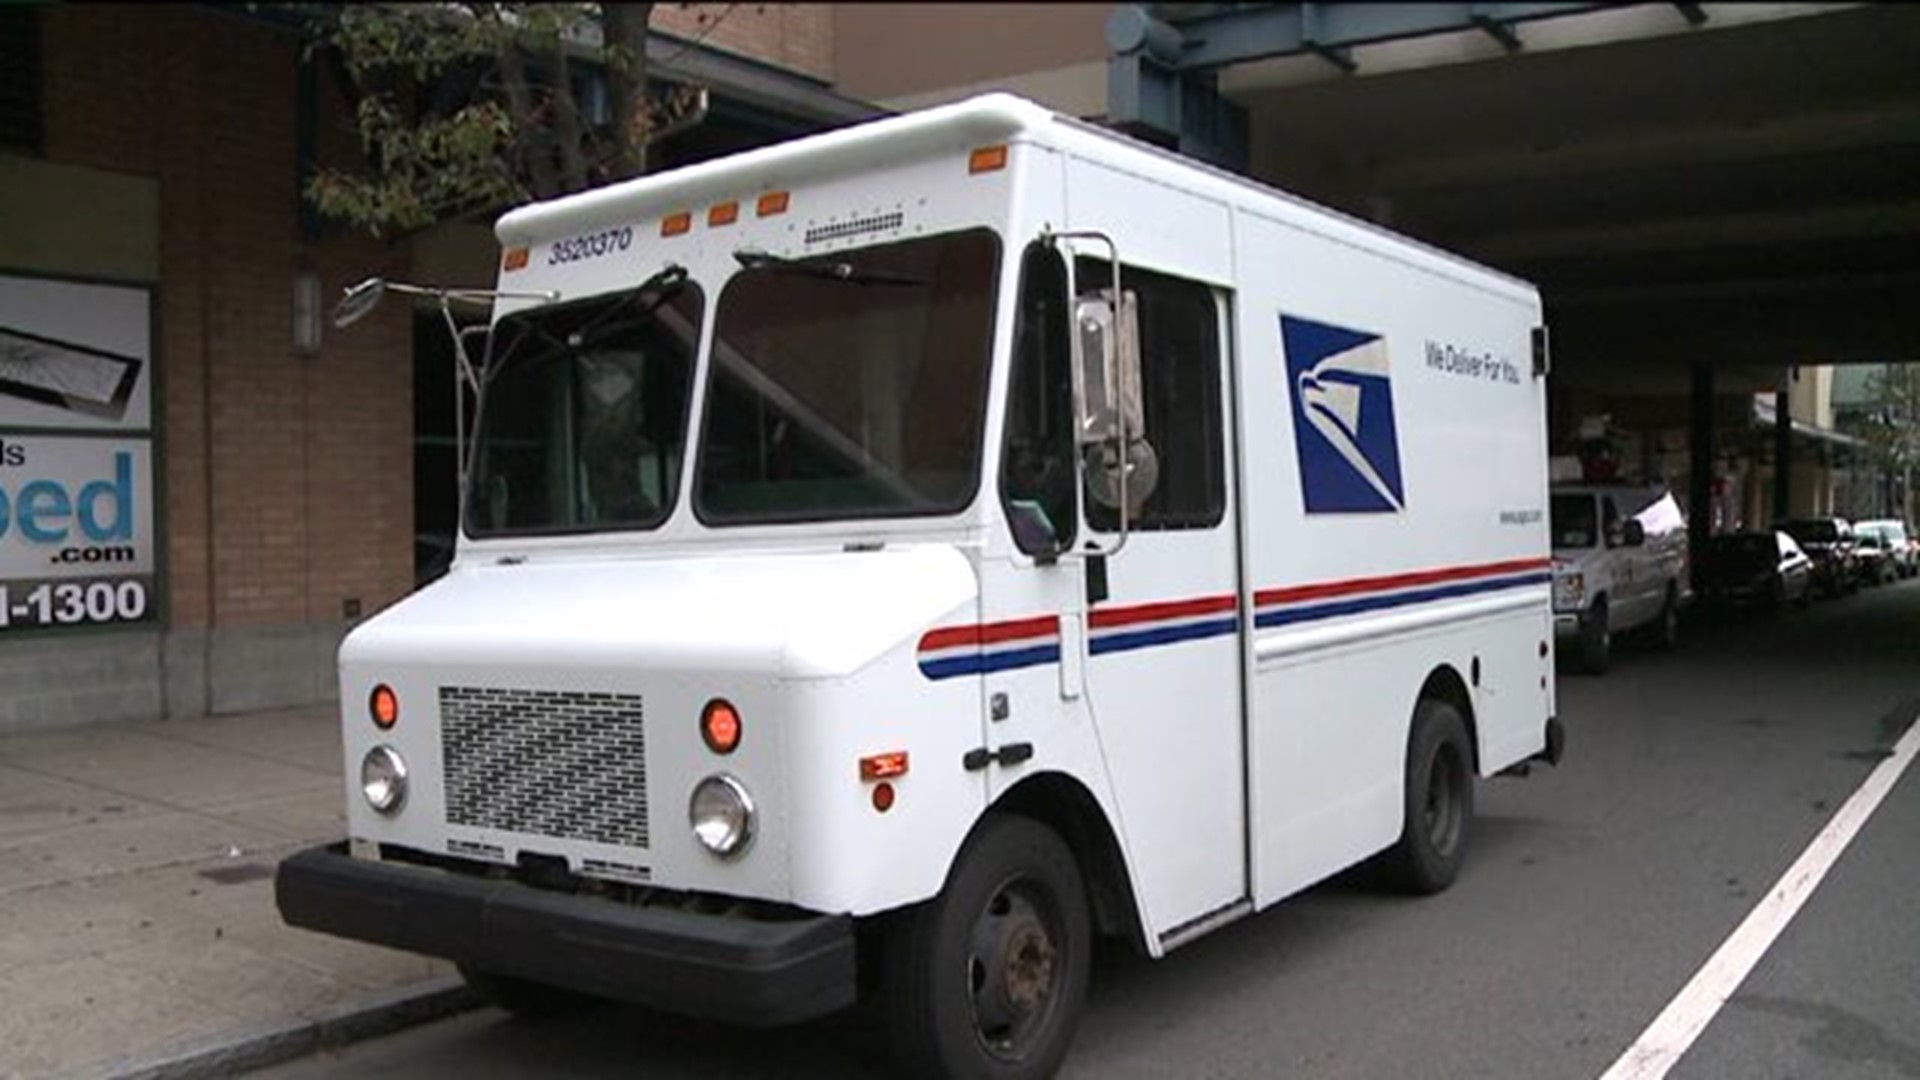 Hefty Back Tax Bill For Postal Workers